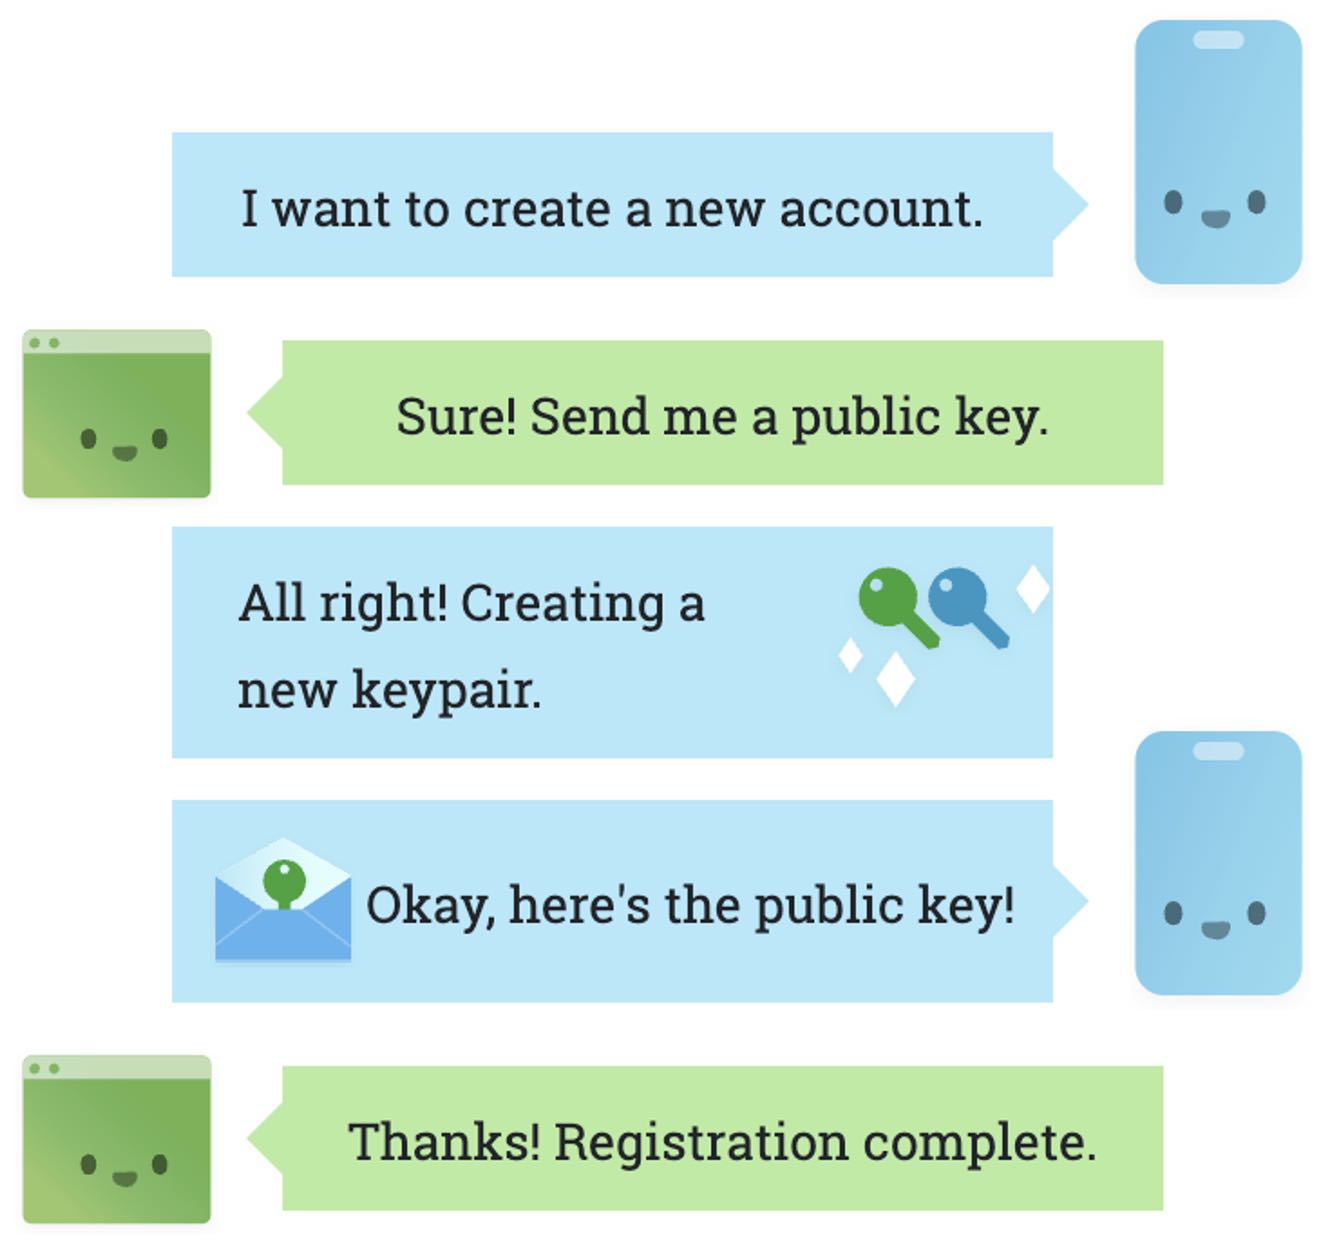 Stylized graphic showing a series of messages about creating keypairs in order to create a new account.